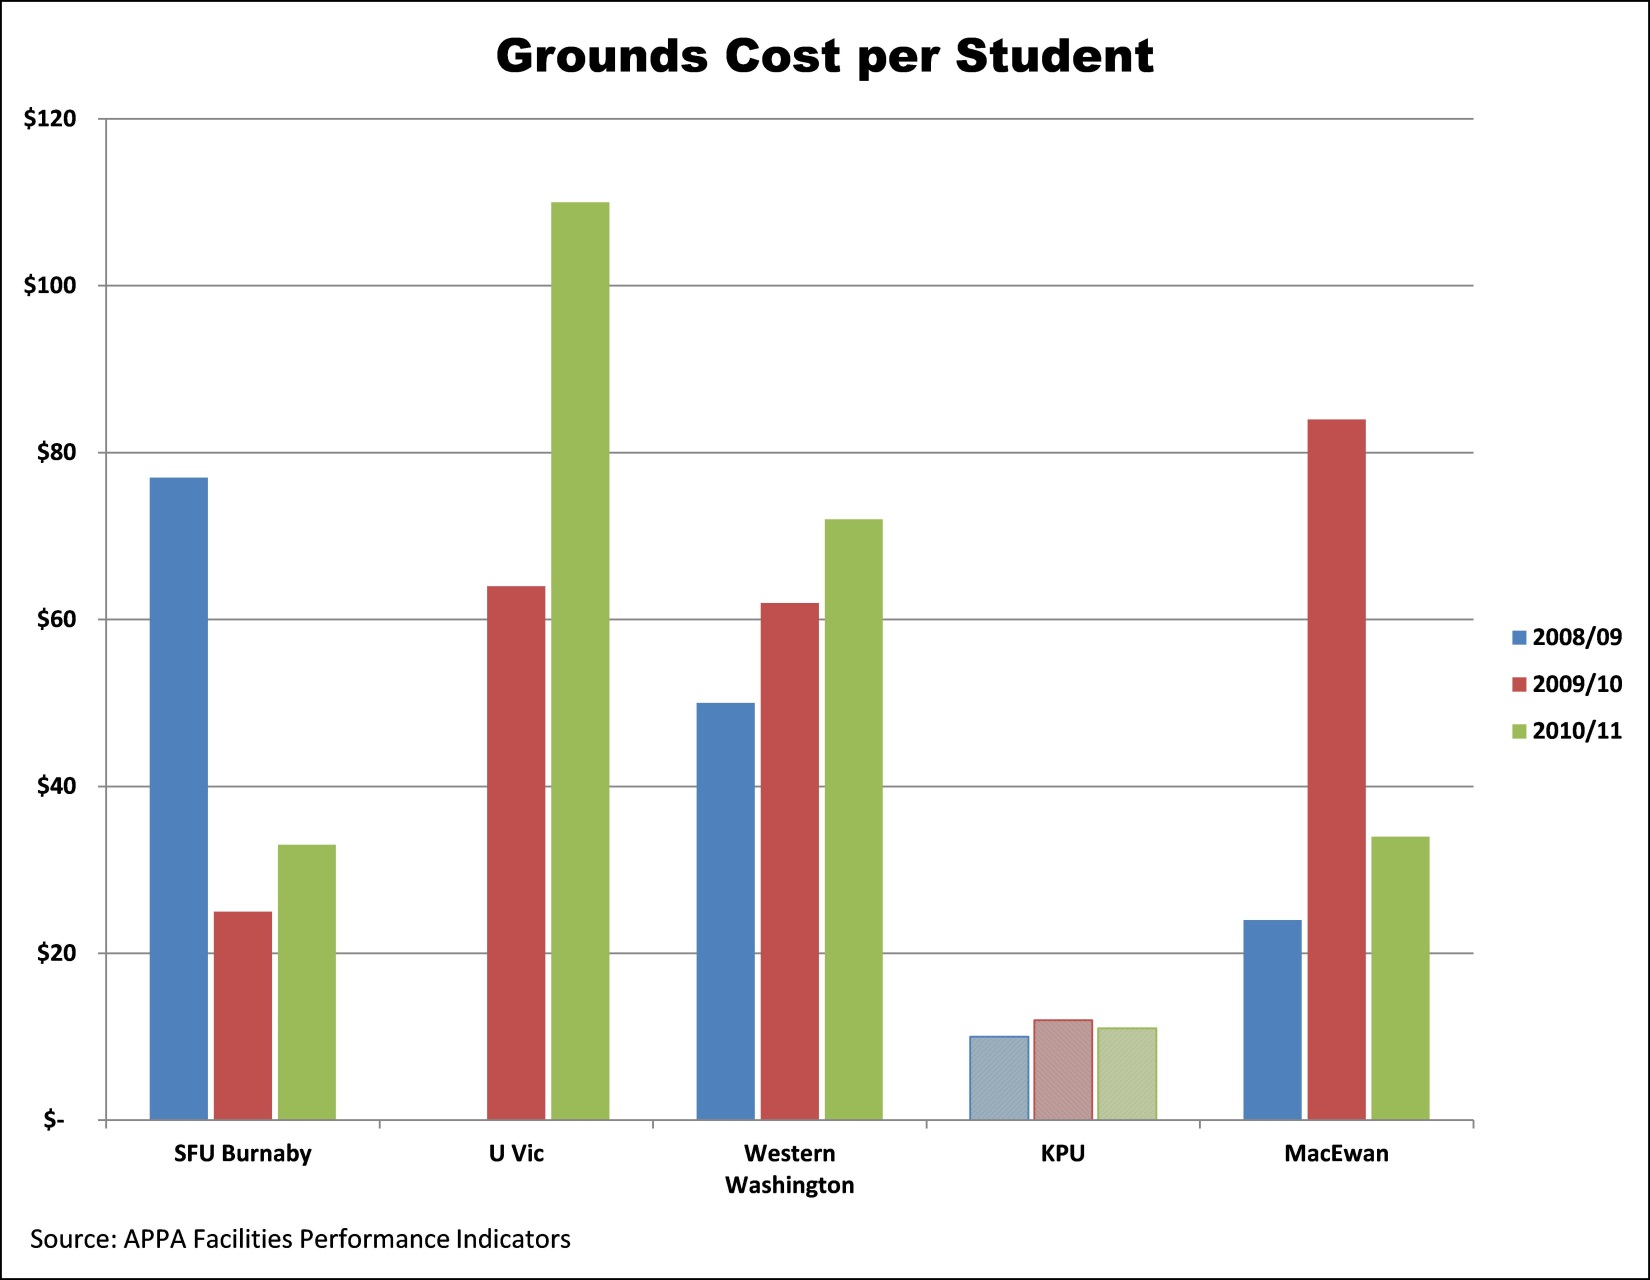 Space Grounds Cost per Student